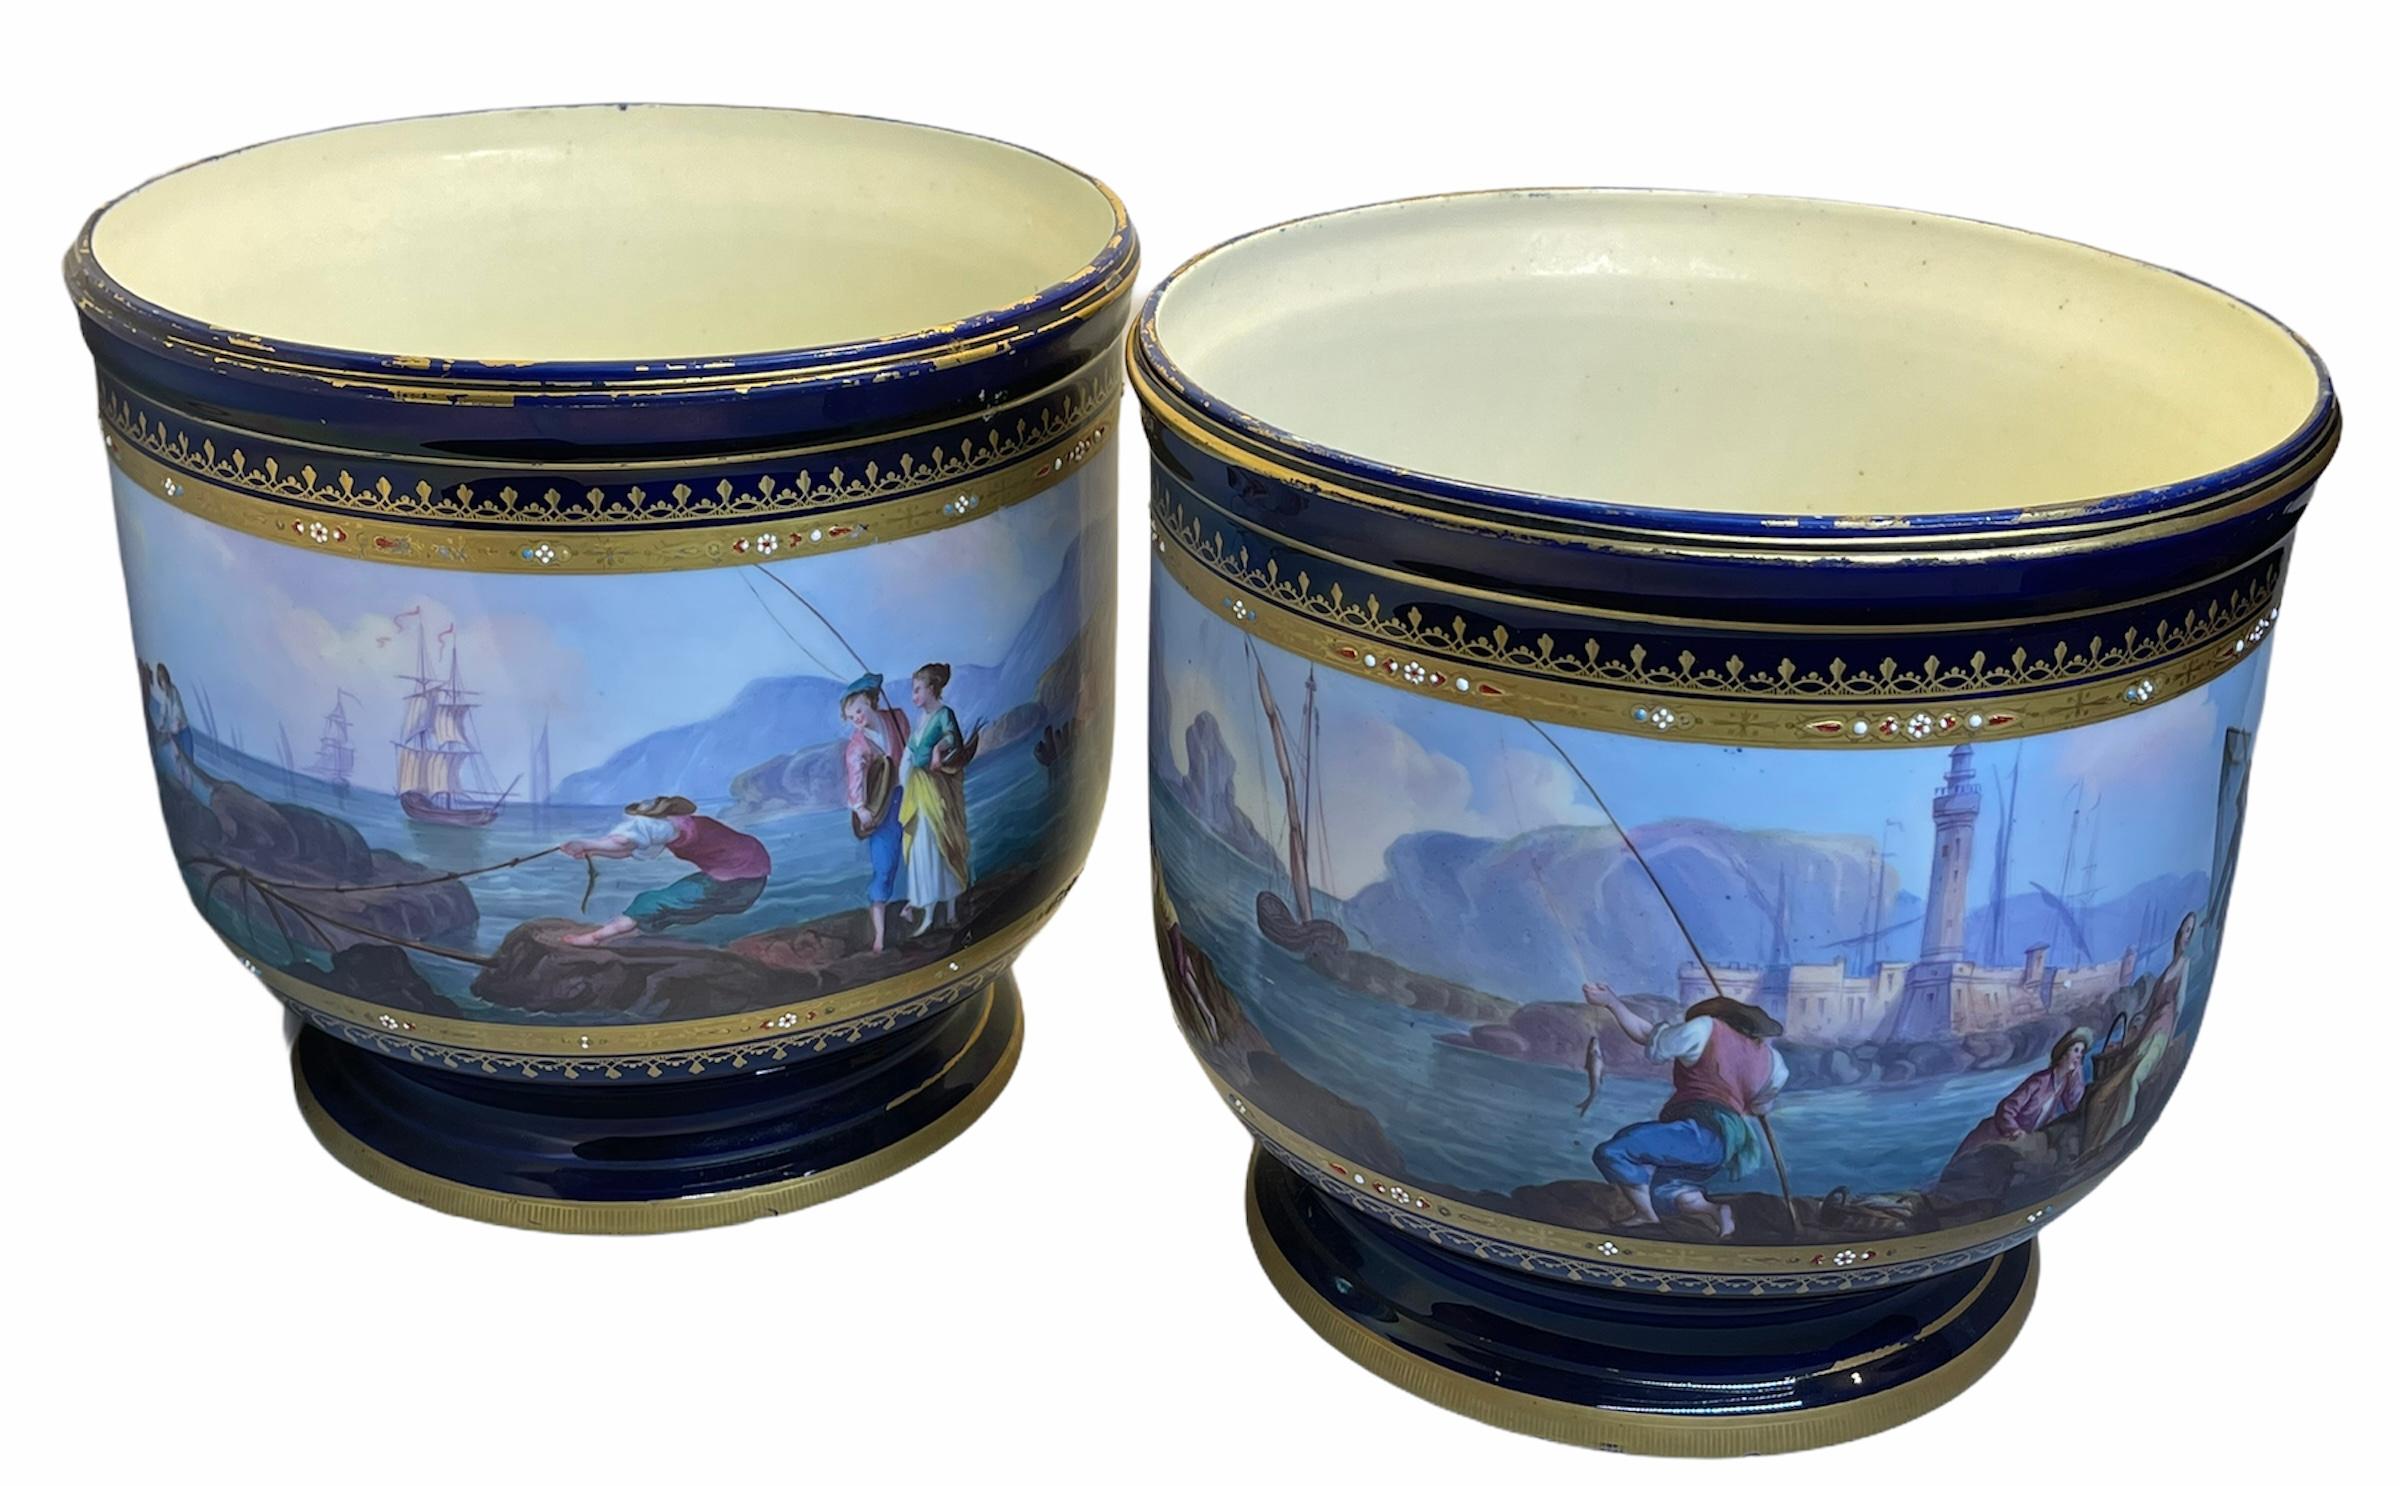 Two large gilt cobalt blue color as a background porcelain Cachepot. They are depicting a continuous hand painted scene of an 18th century coastal landscape with fishermen and ships. Embellished in the top and bottom with a golden ribbon of flowers